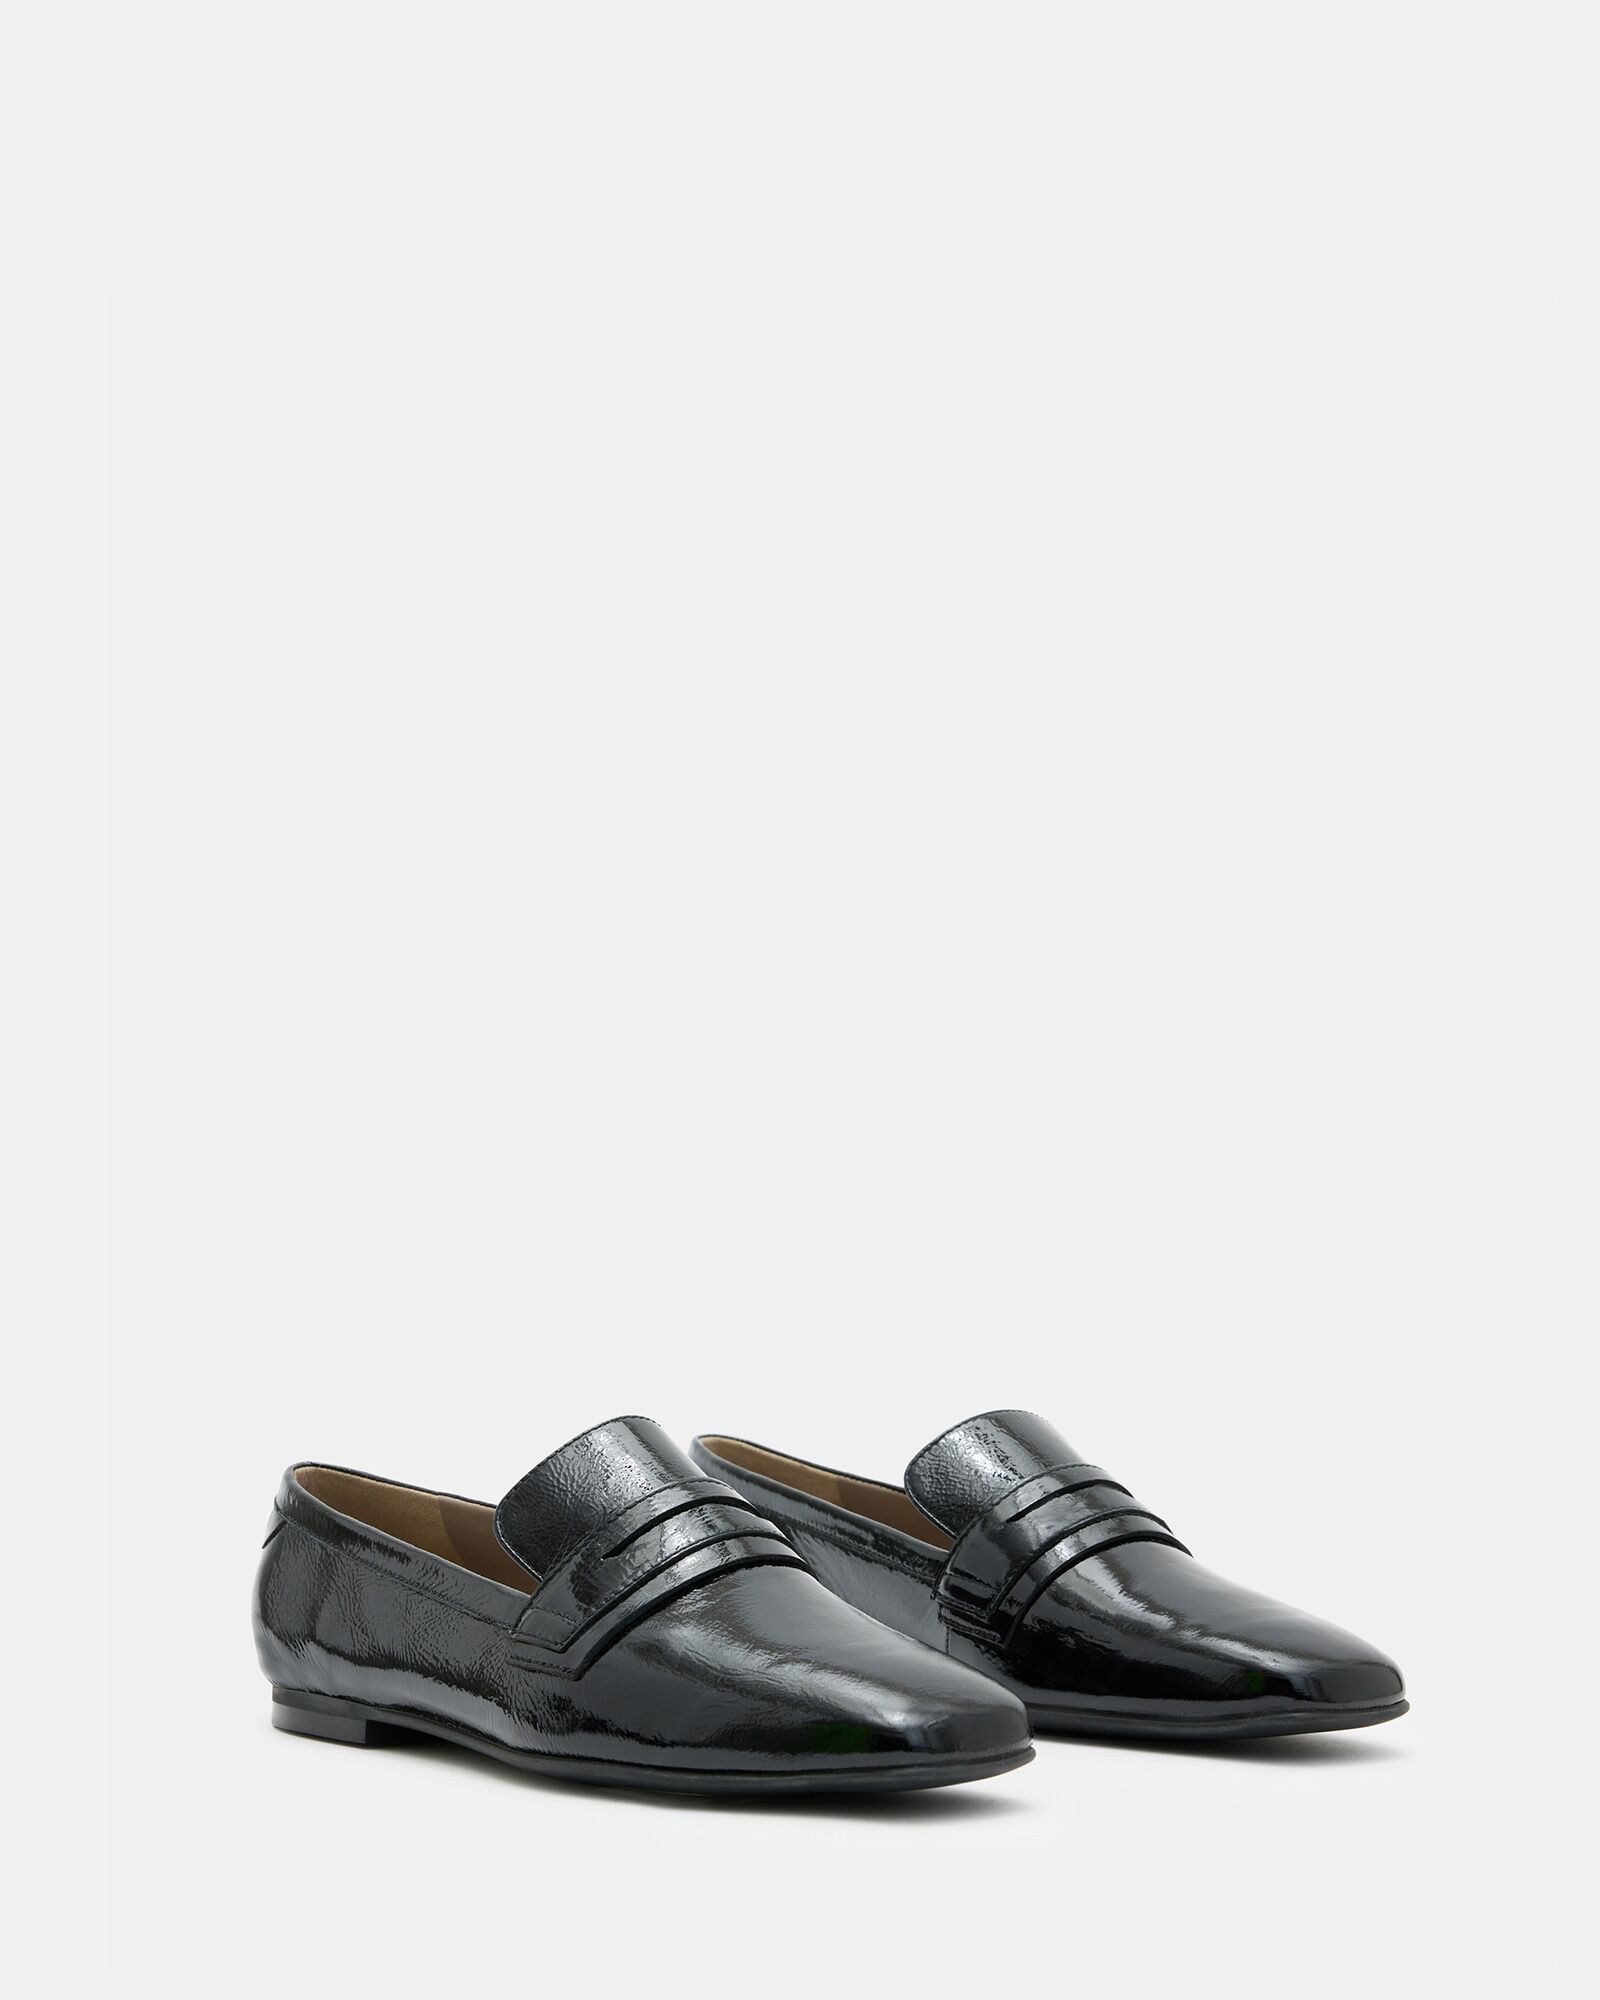 Sasha Patent Leather Loafer Shoes